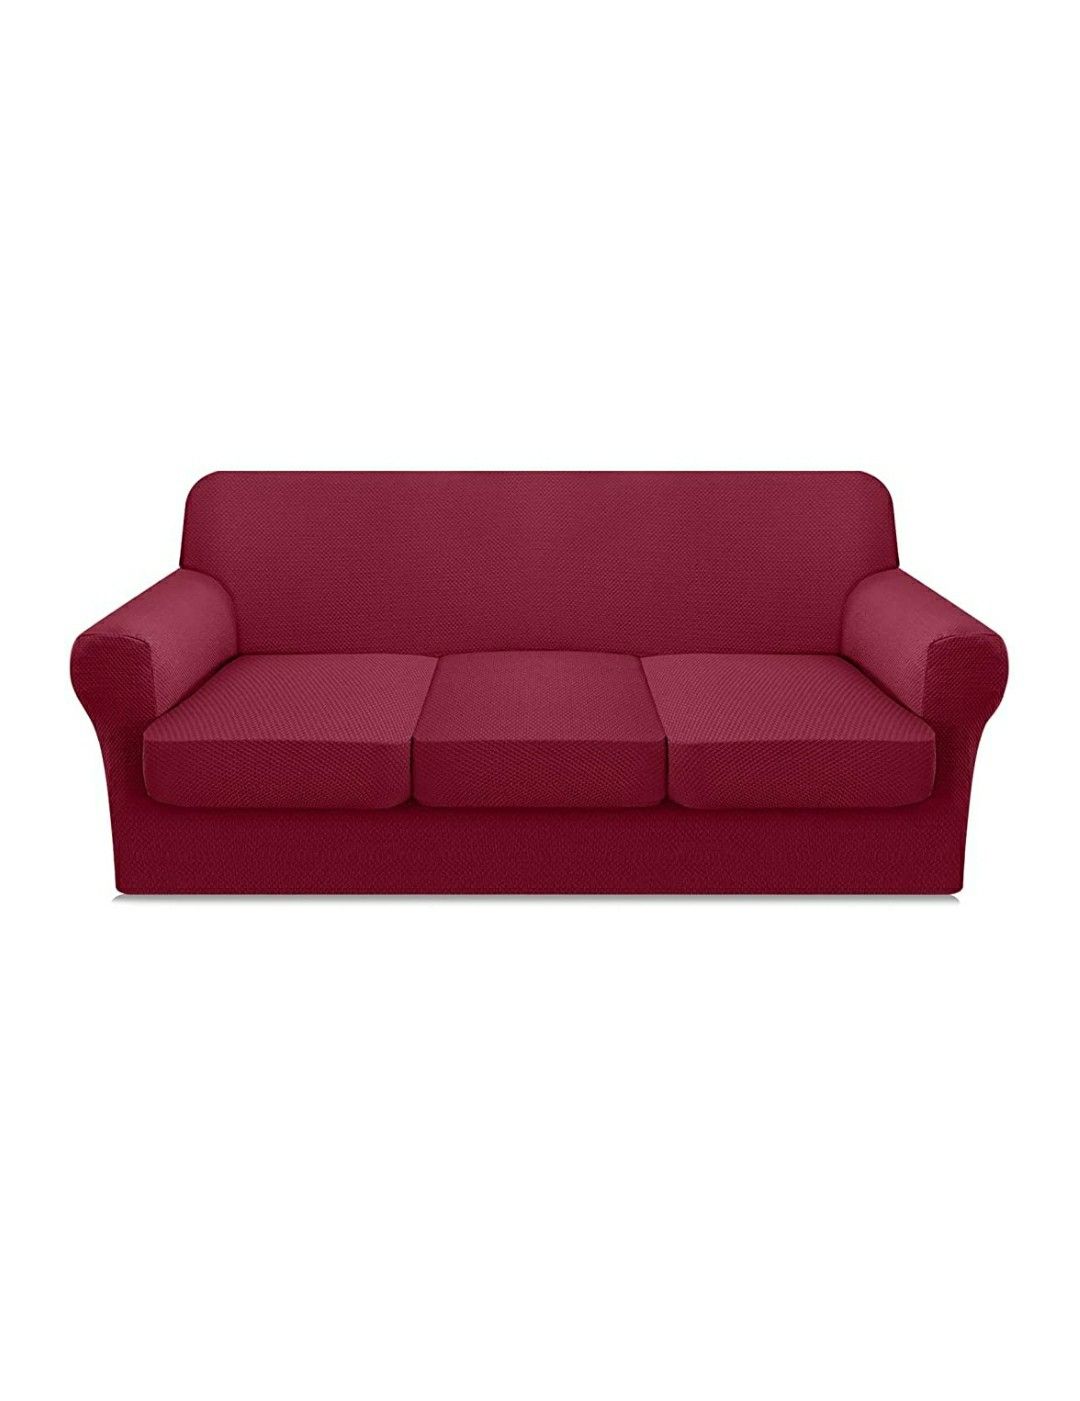 Sofa couch cover